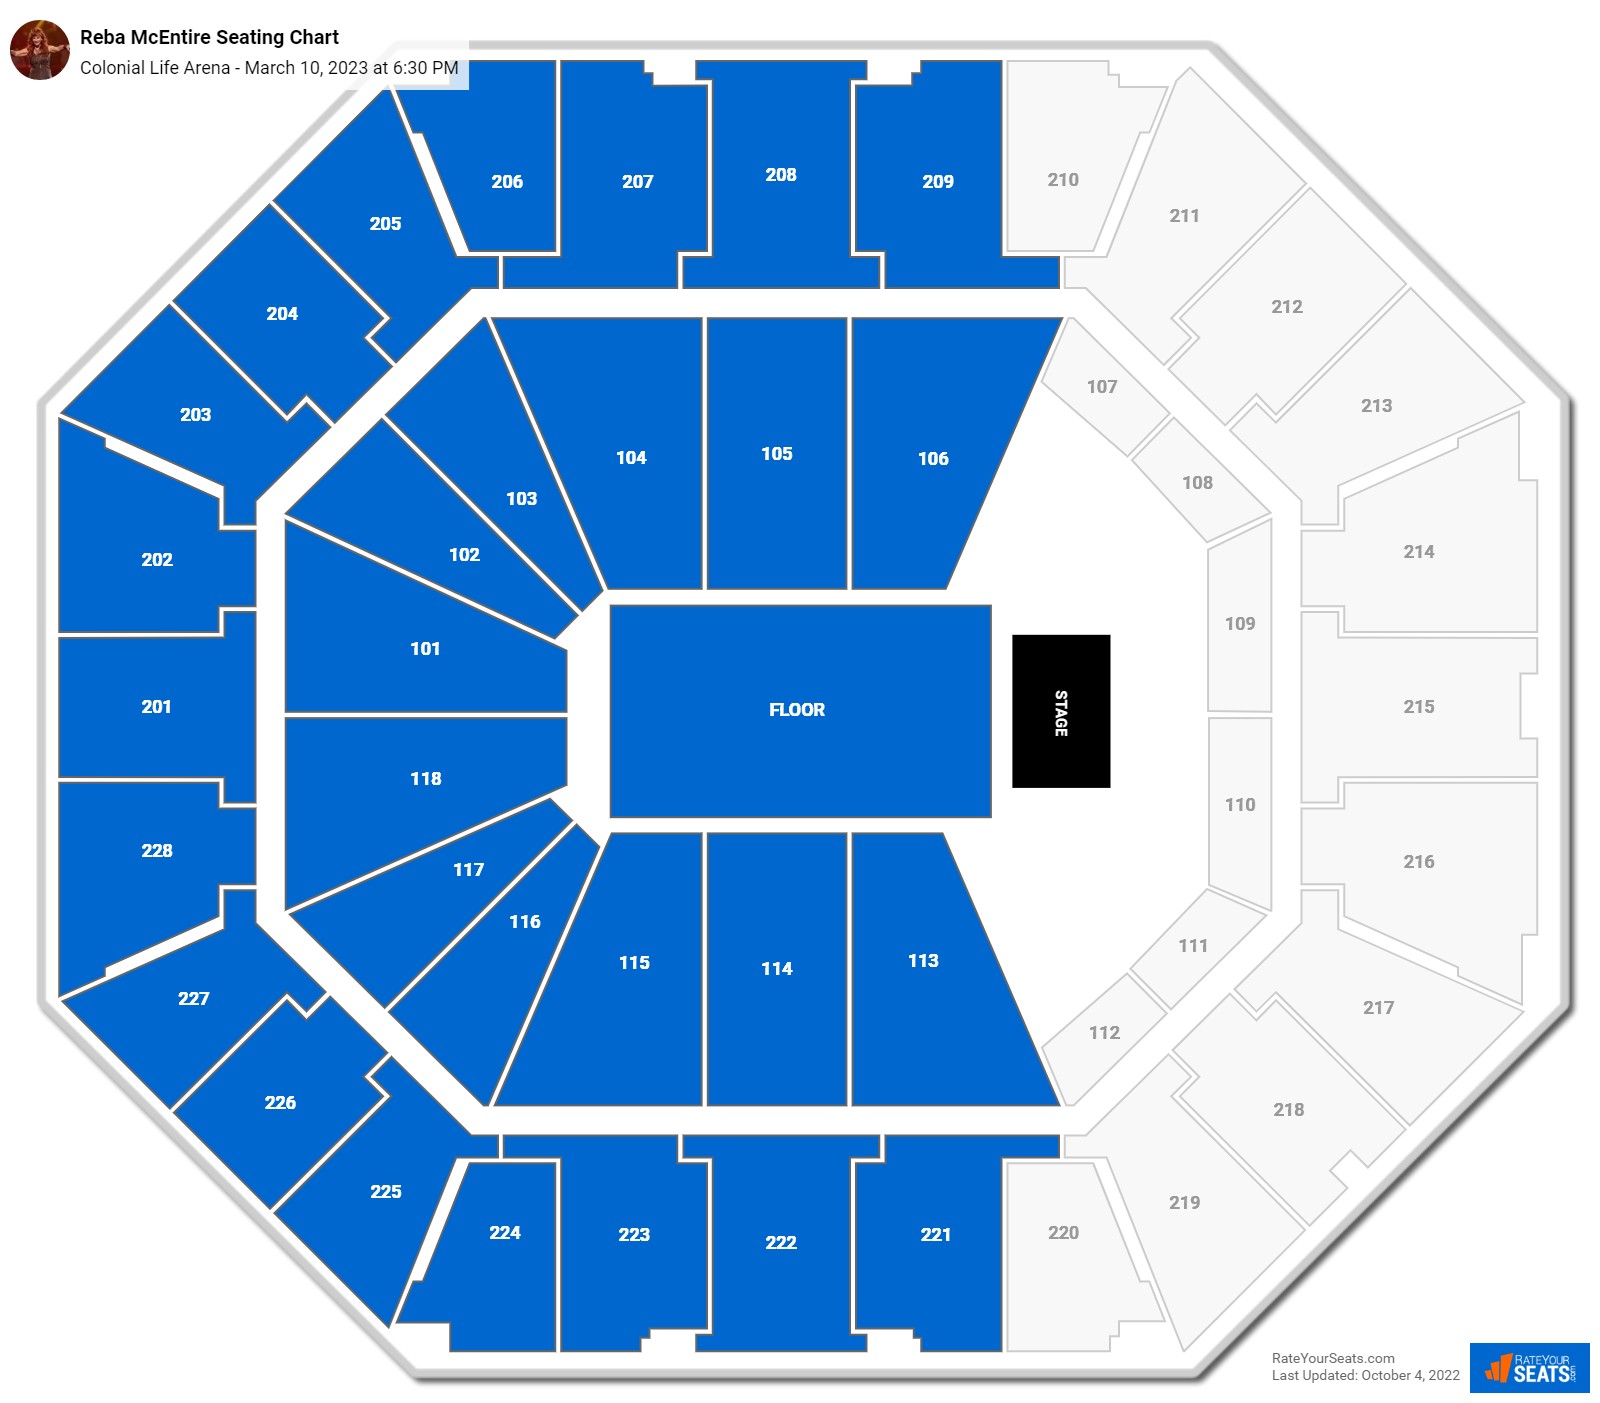 Colonial Life Arena Concert Seating Chart